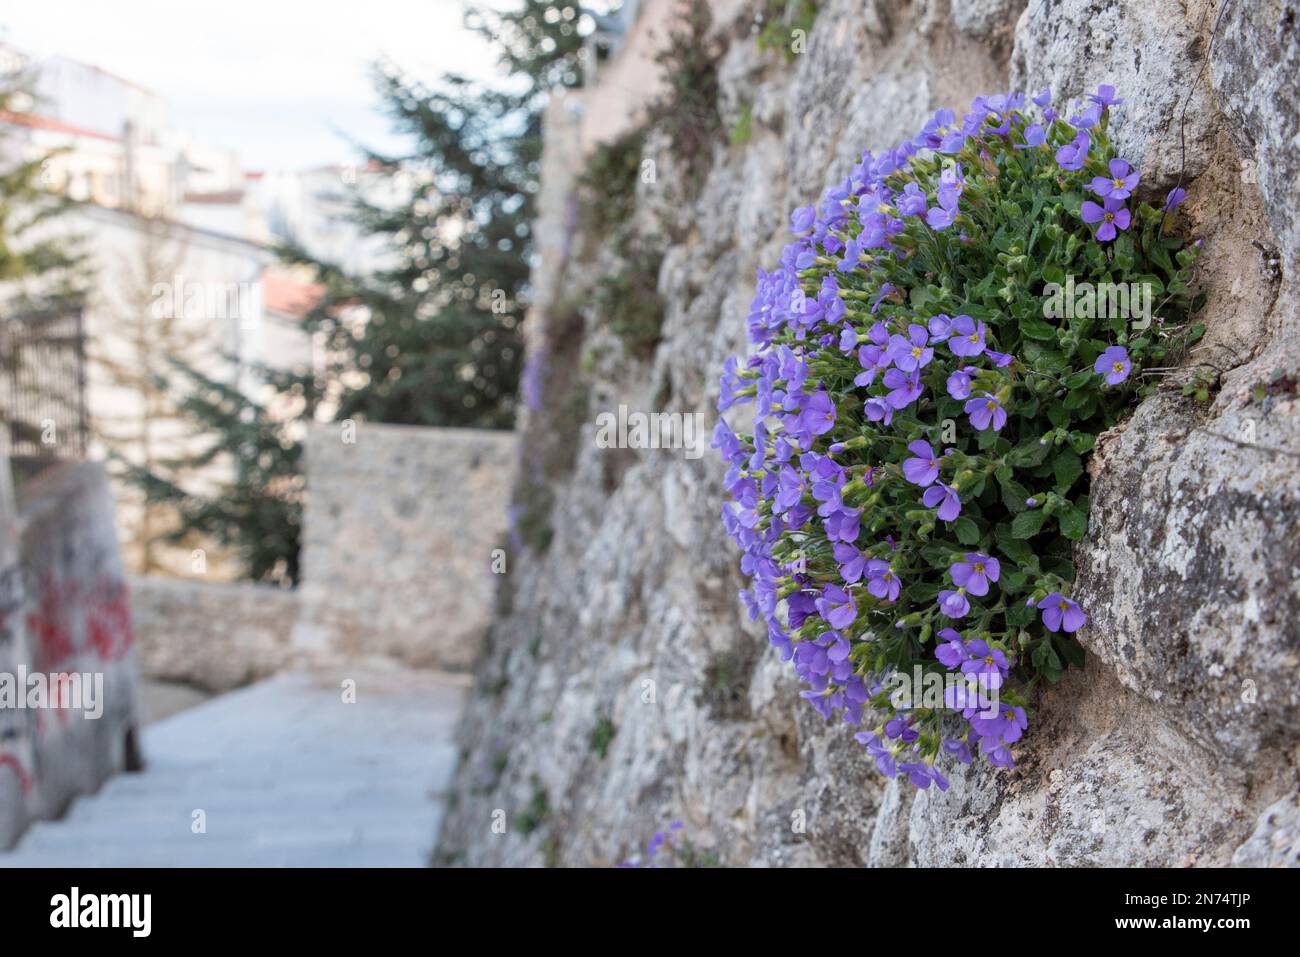 Purple rock cress on an antique wall in Monte Sant Angelo in Gargano, Southern Italy Stock Photo